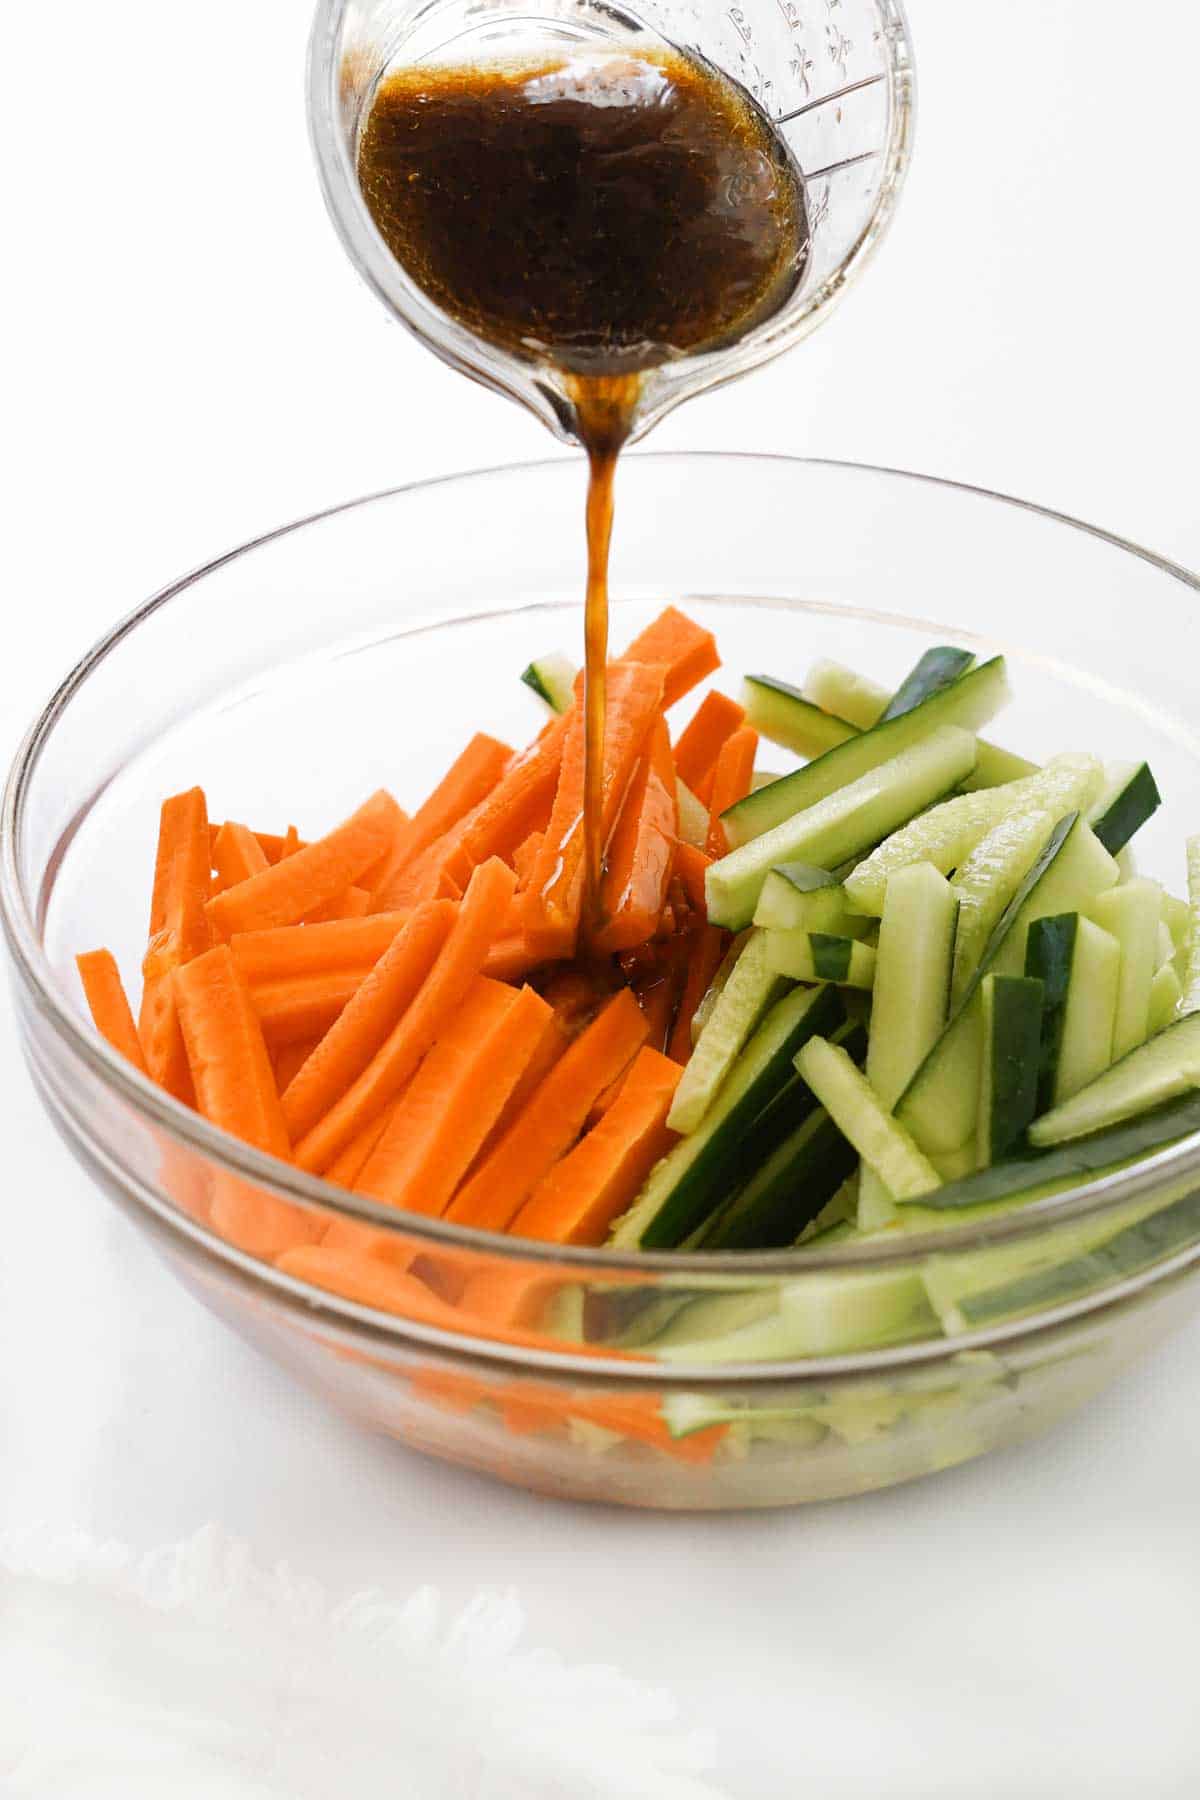 Pouring dressing over sliced carrots and cucumbers in a bowl.